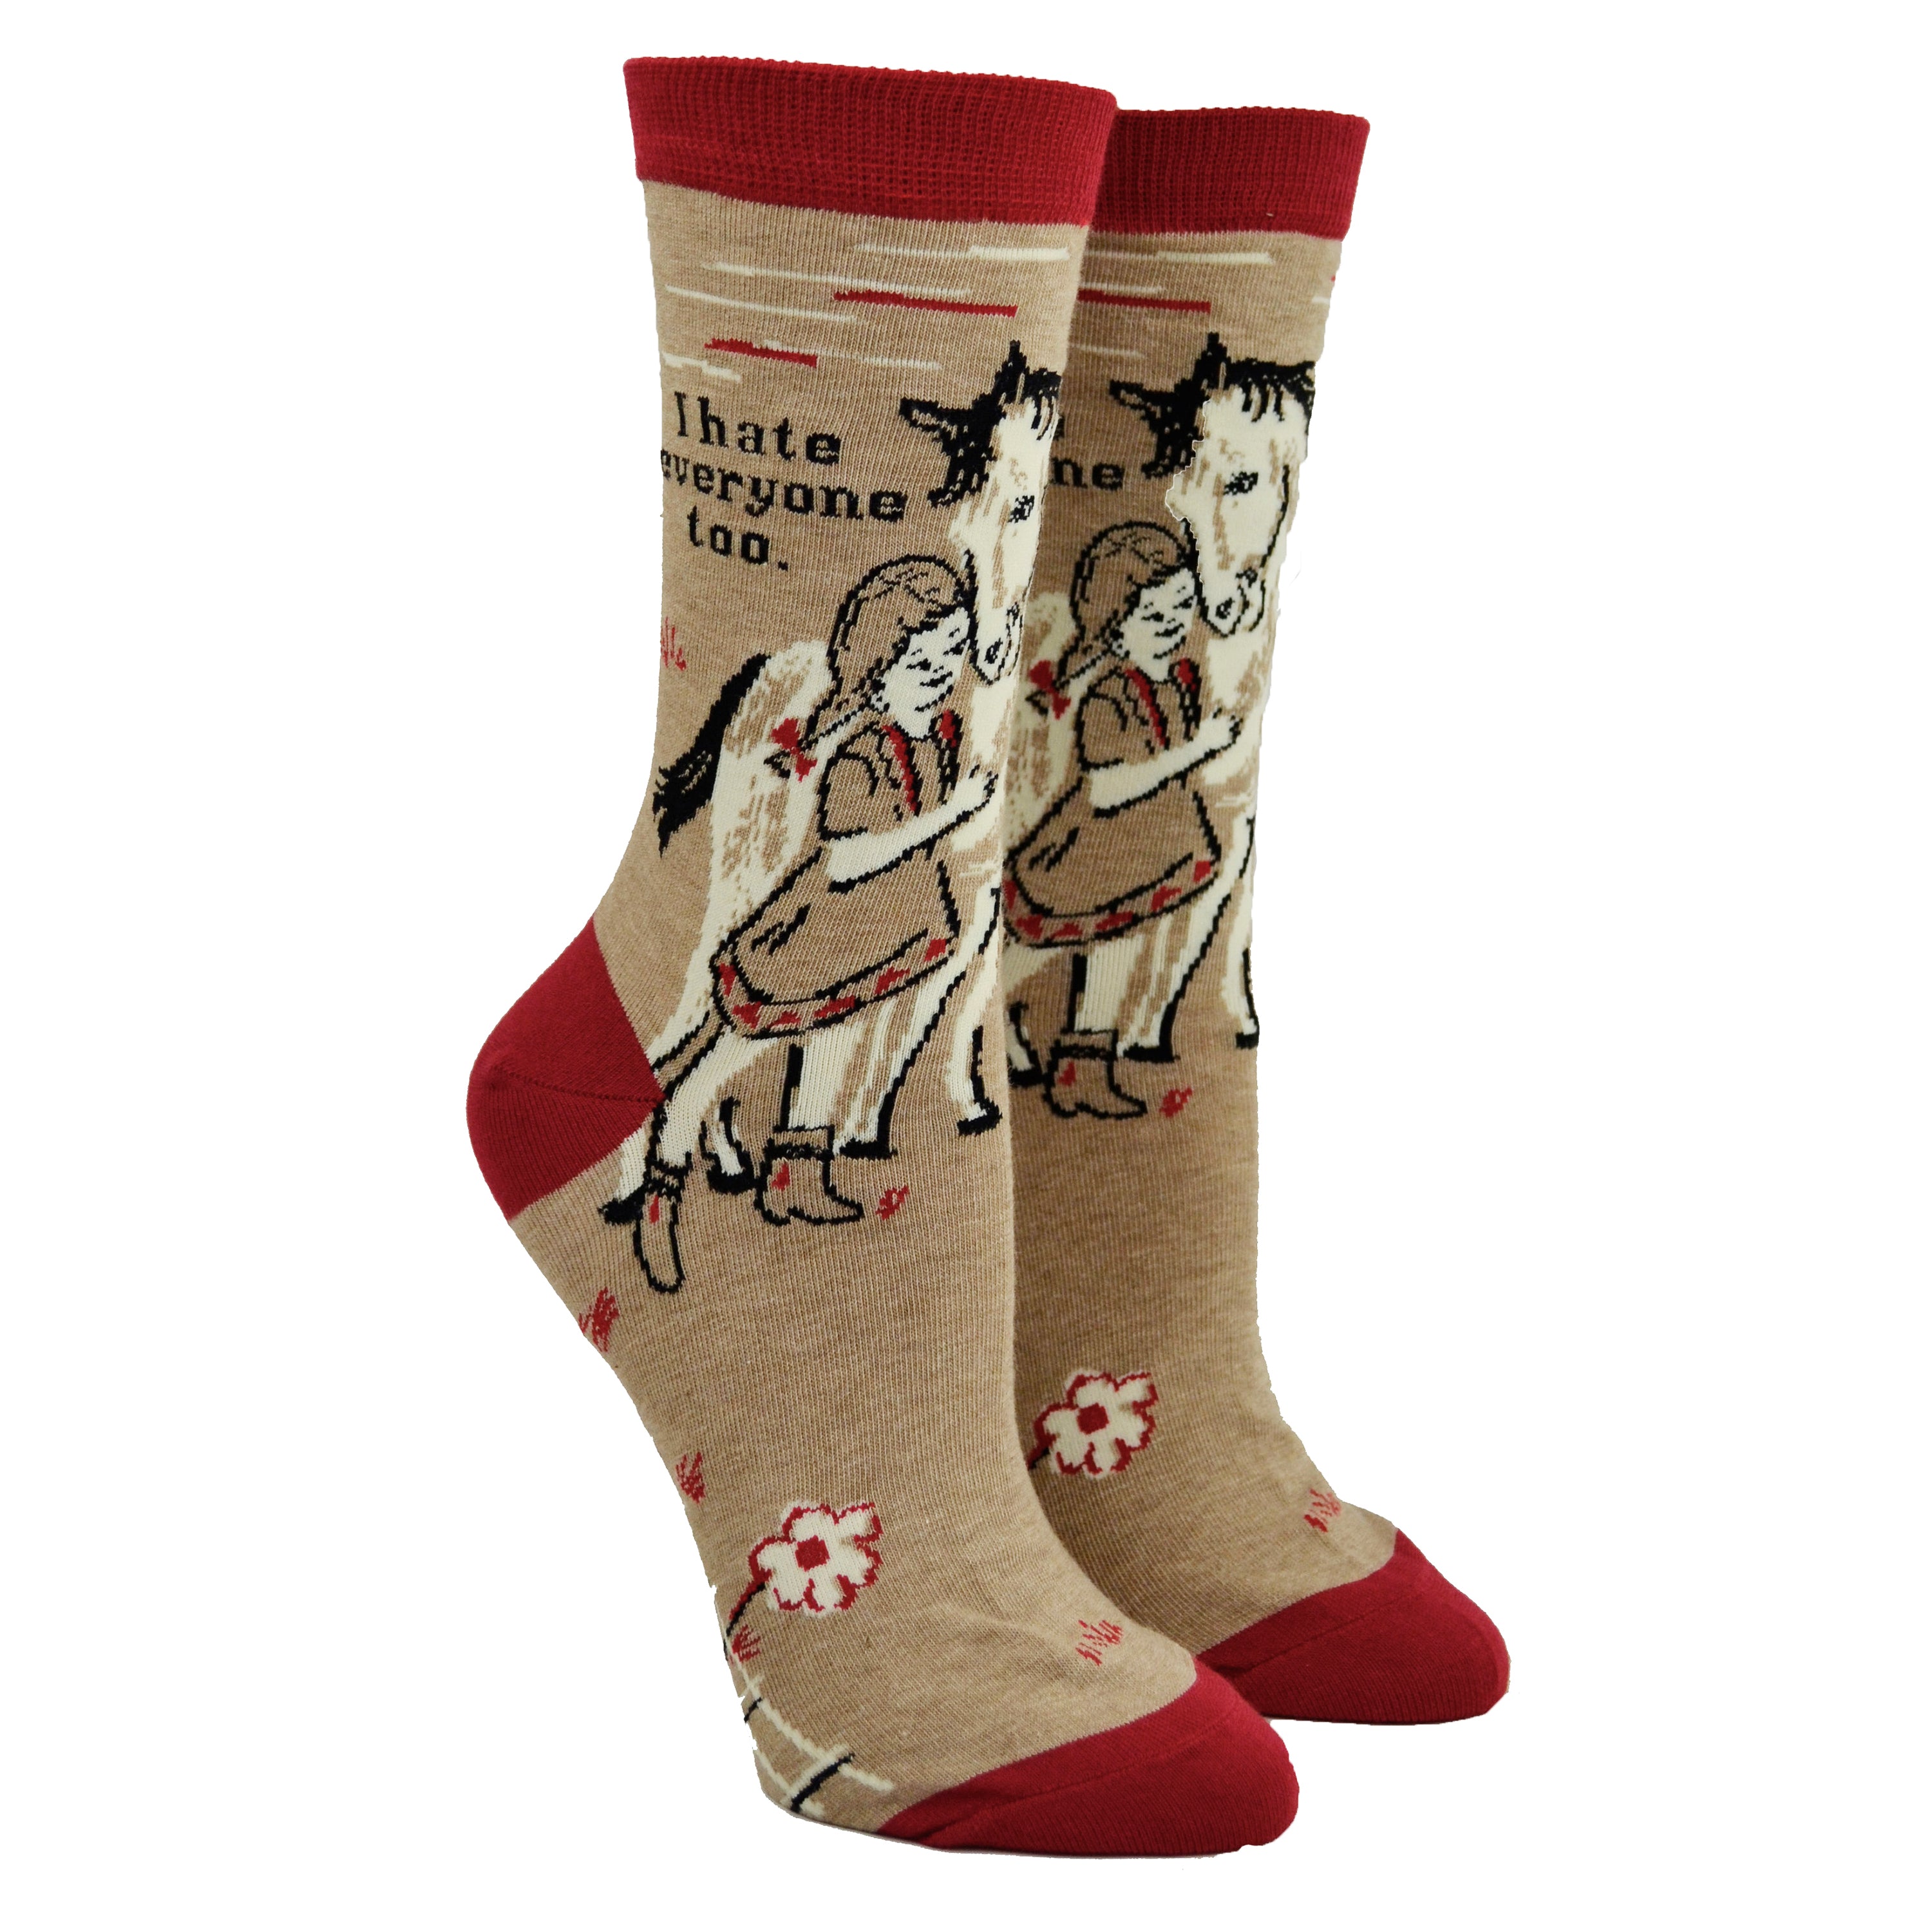 Shown on leg forms, a pair of women's Blue Q brand combed cotton socks in brown with a red heel, toe, and cuff. The leg of the sock features a little girl with a horse with the phrase, 